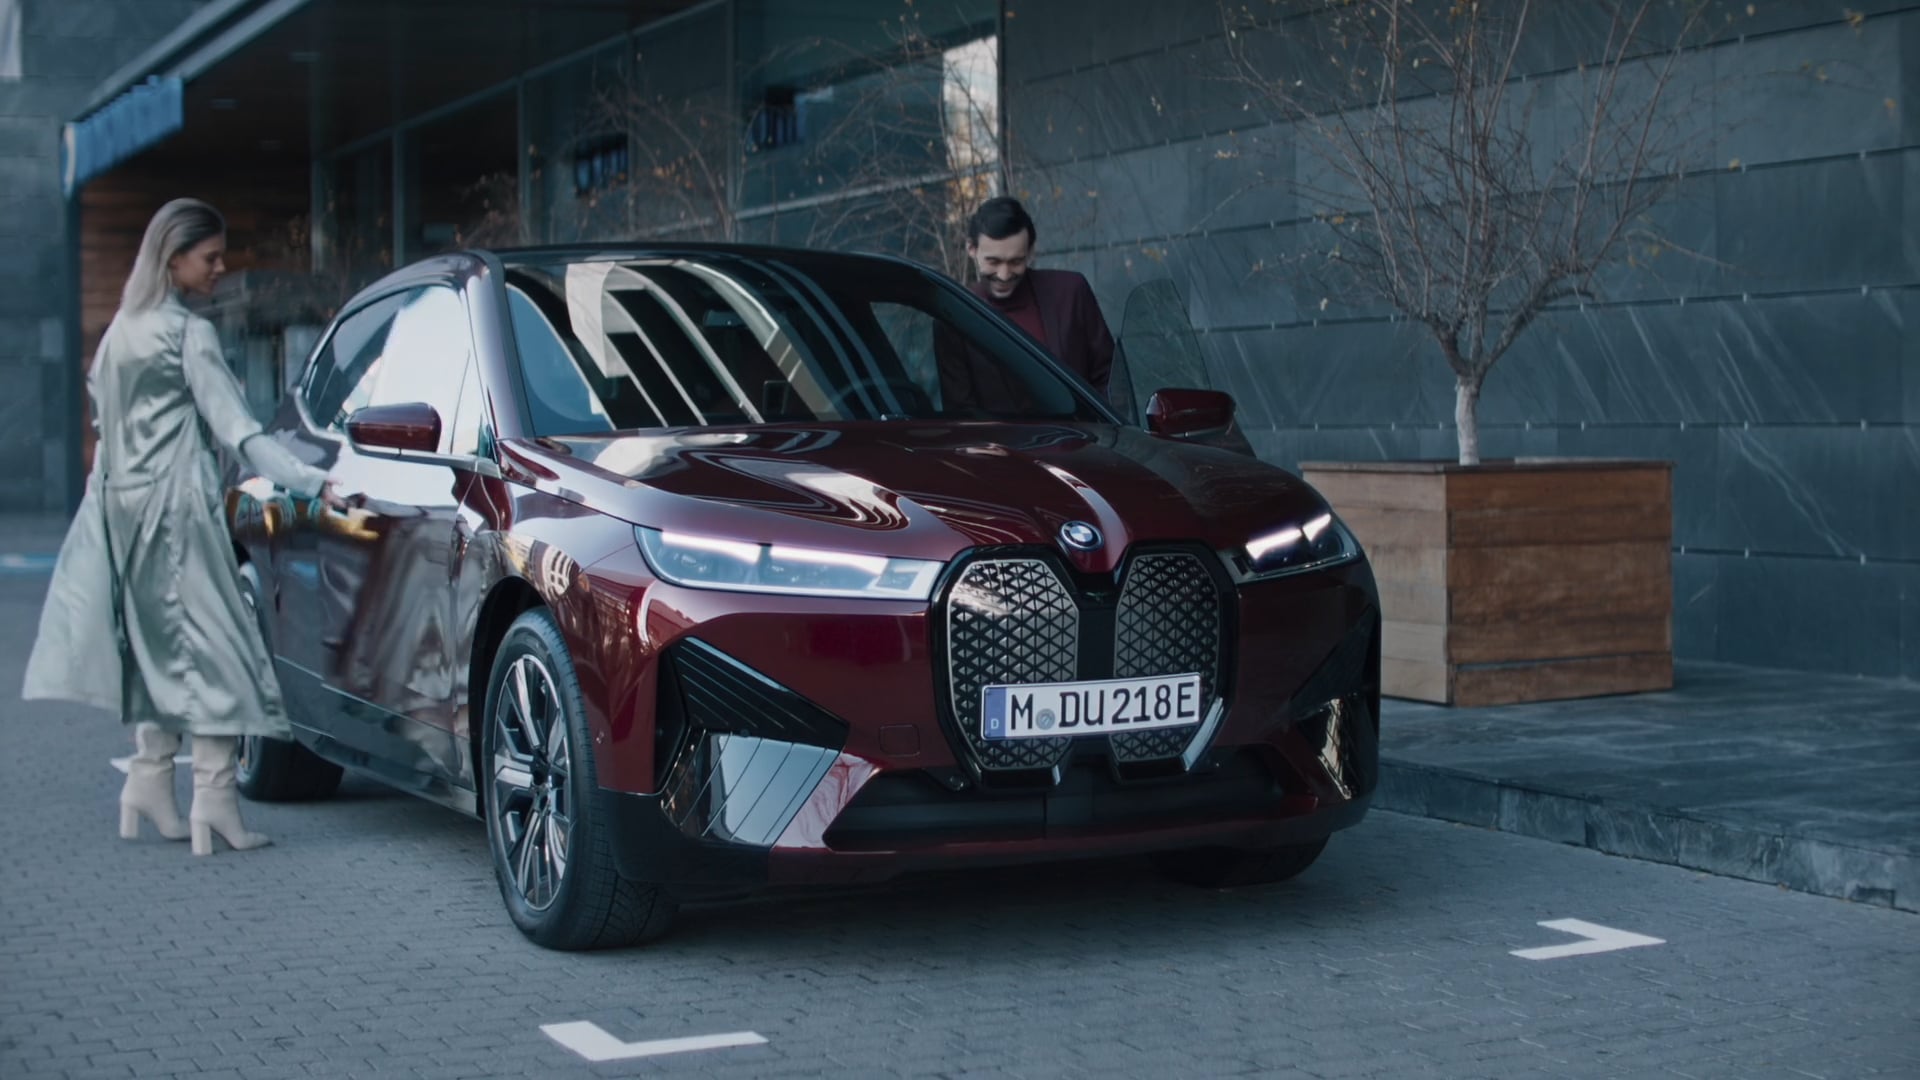 BMW - The iDrive Challenge - Arrive In Style